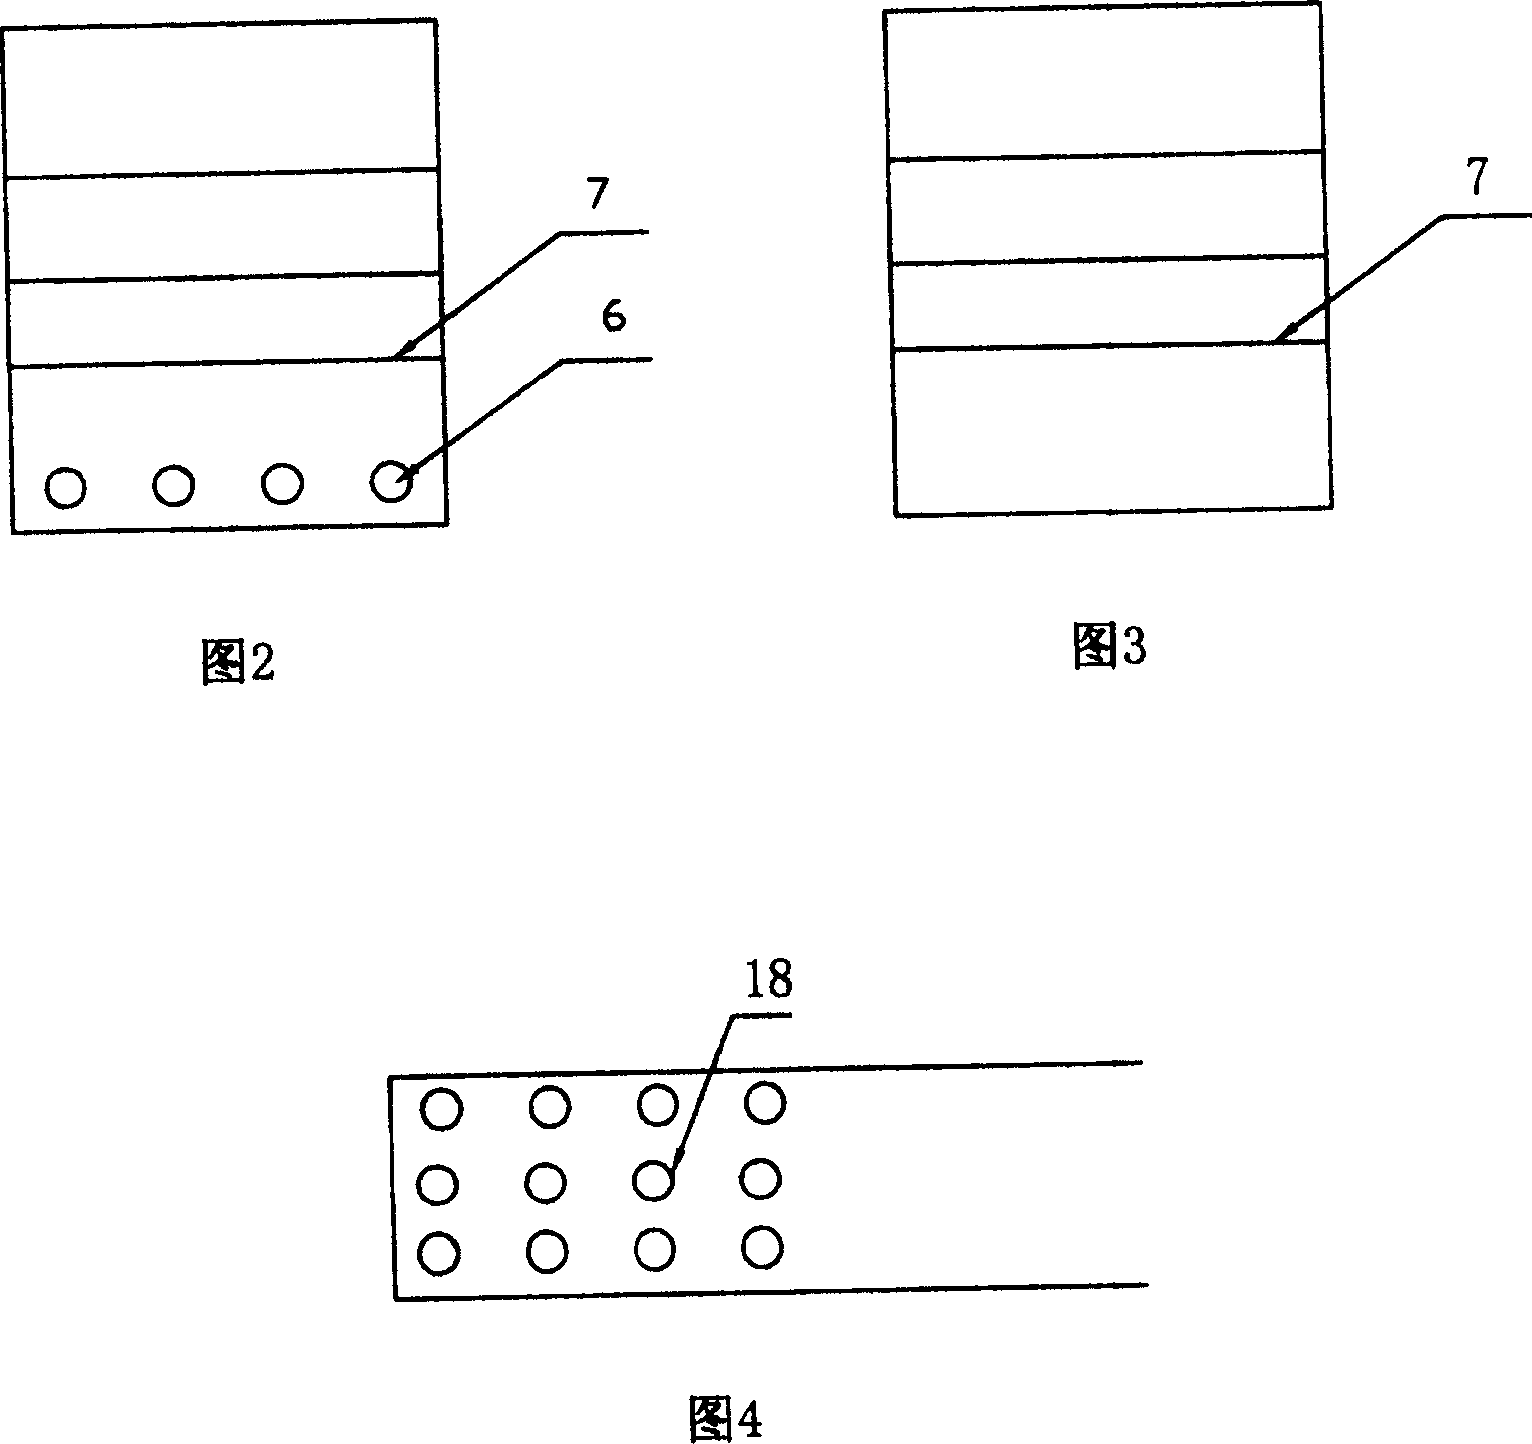 Lake purification system for controlling algae growth effectively and method thereof